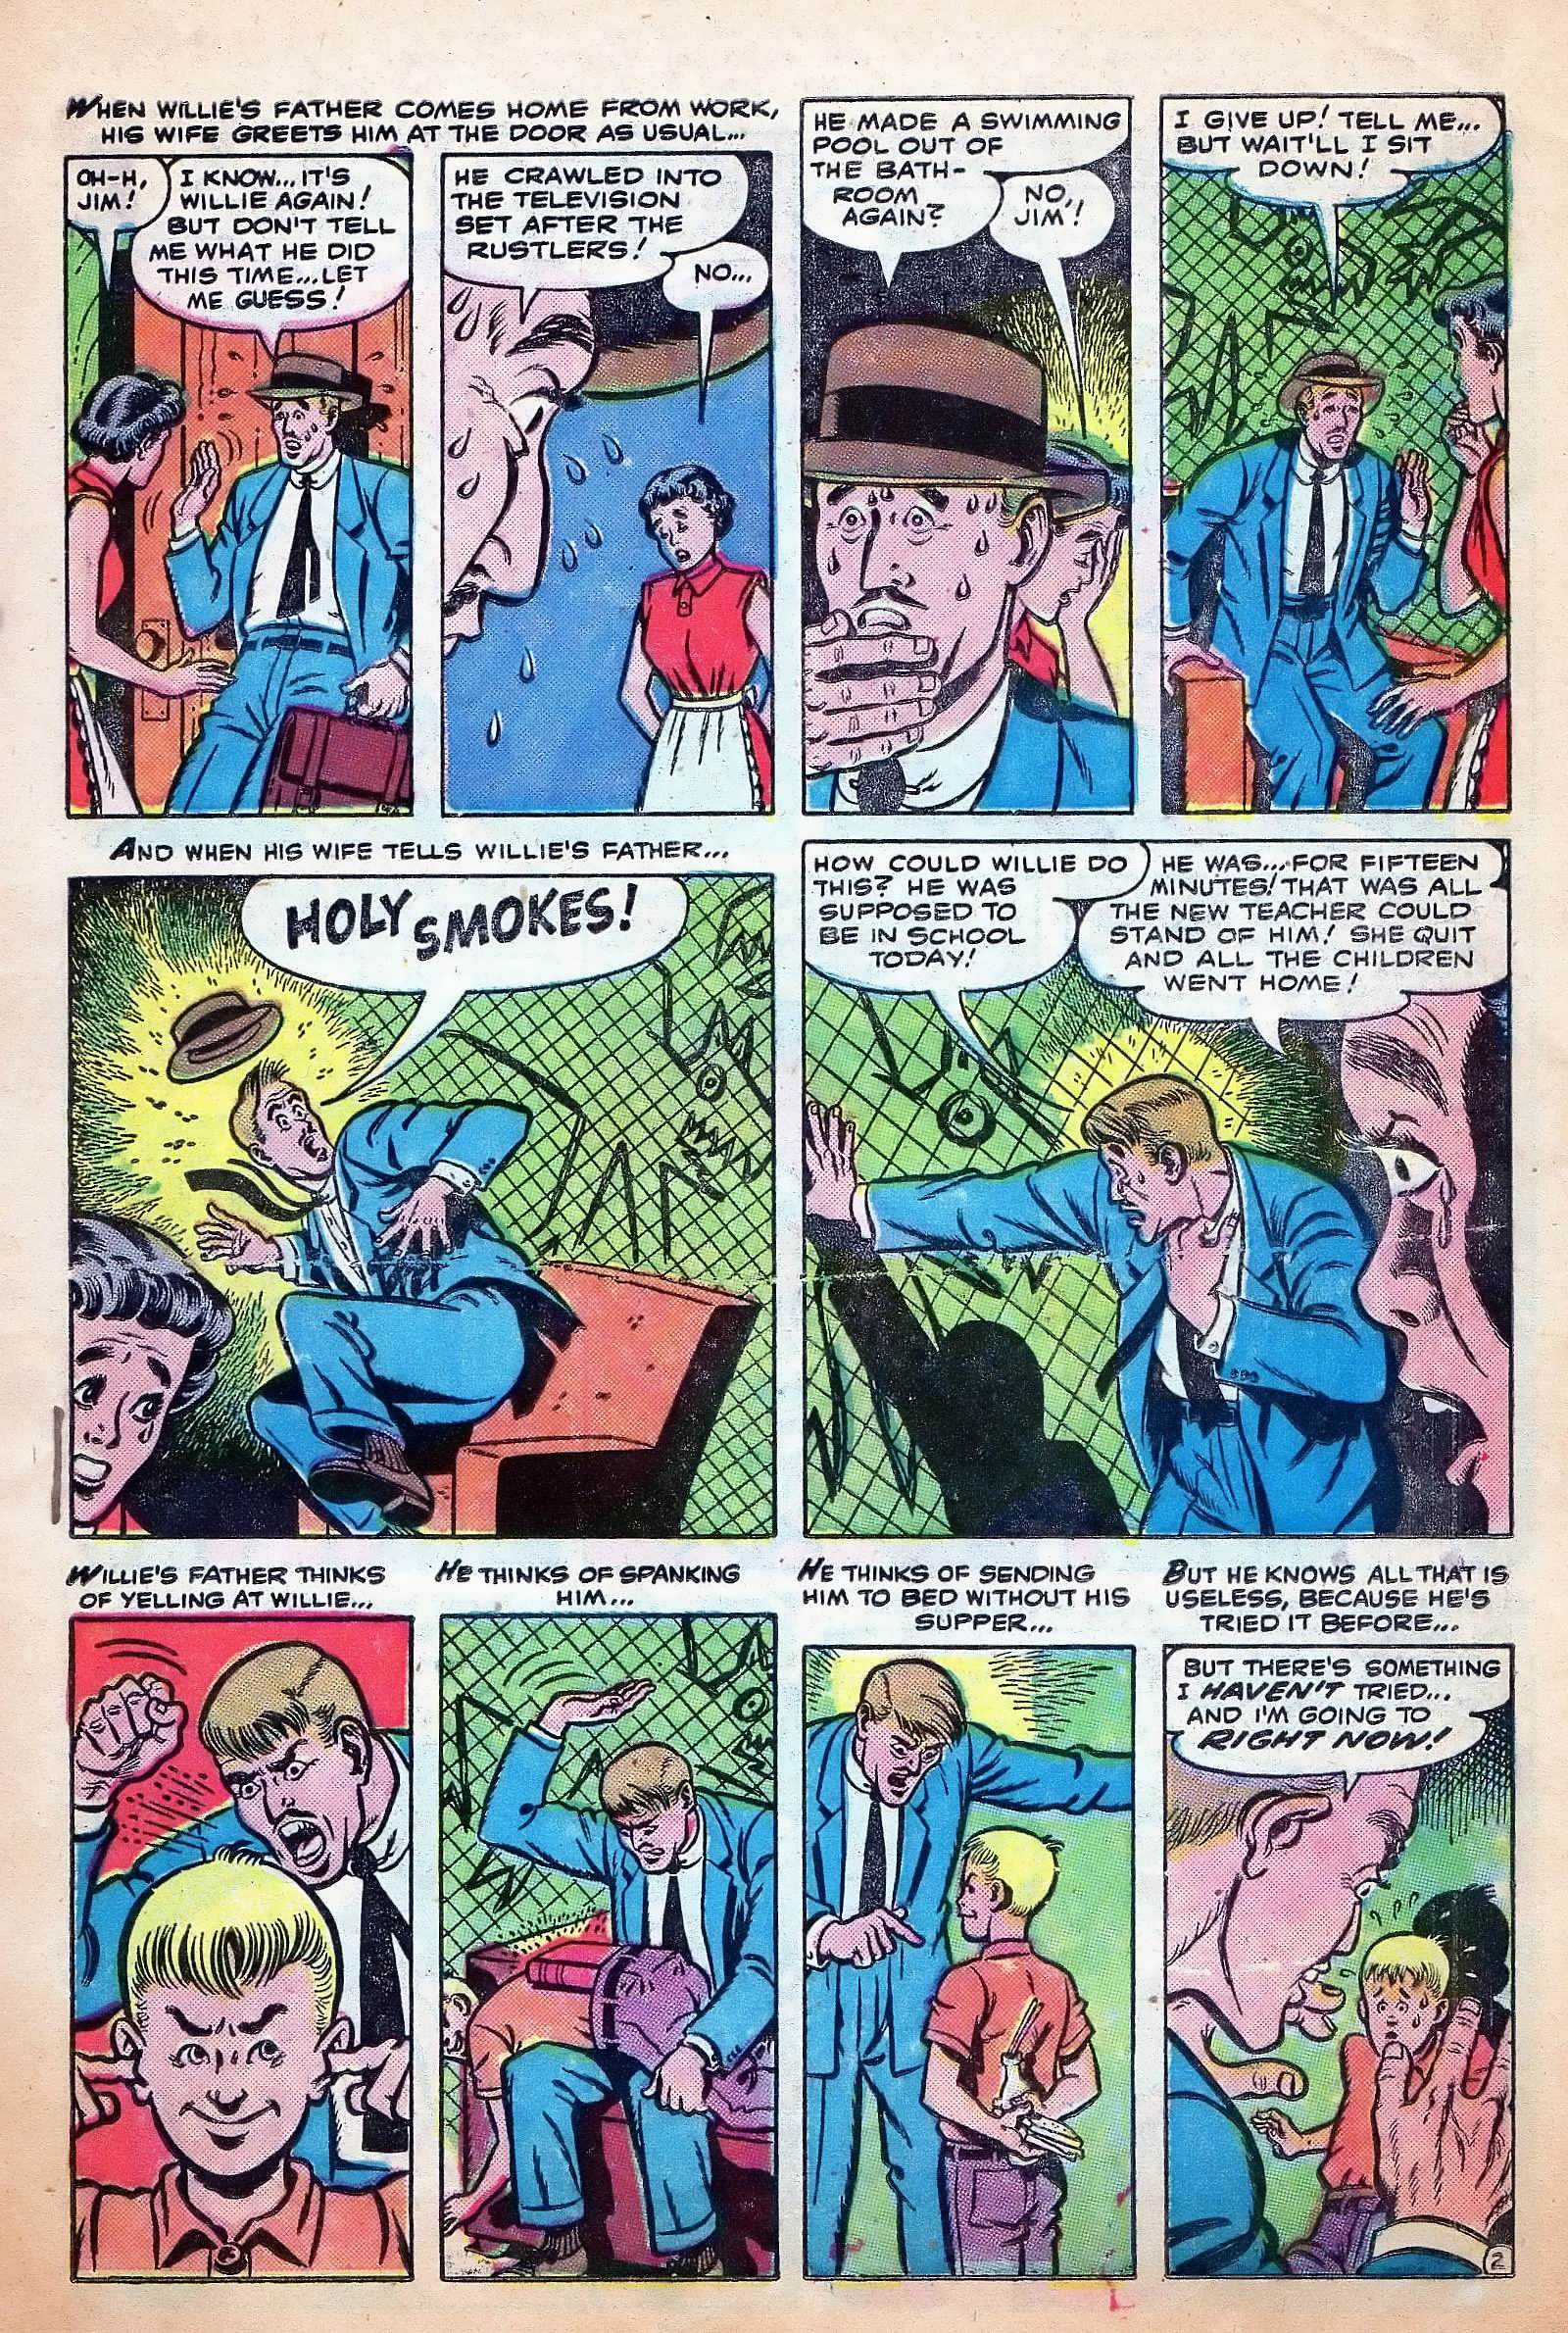 Marvel Tales (1949) 130 Page 10